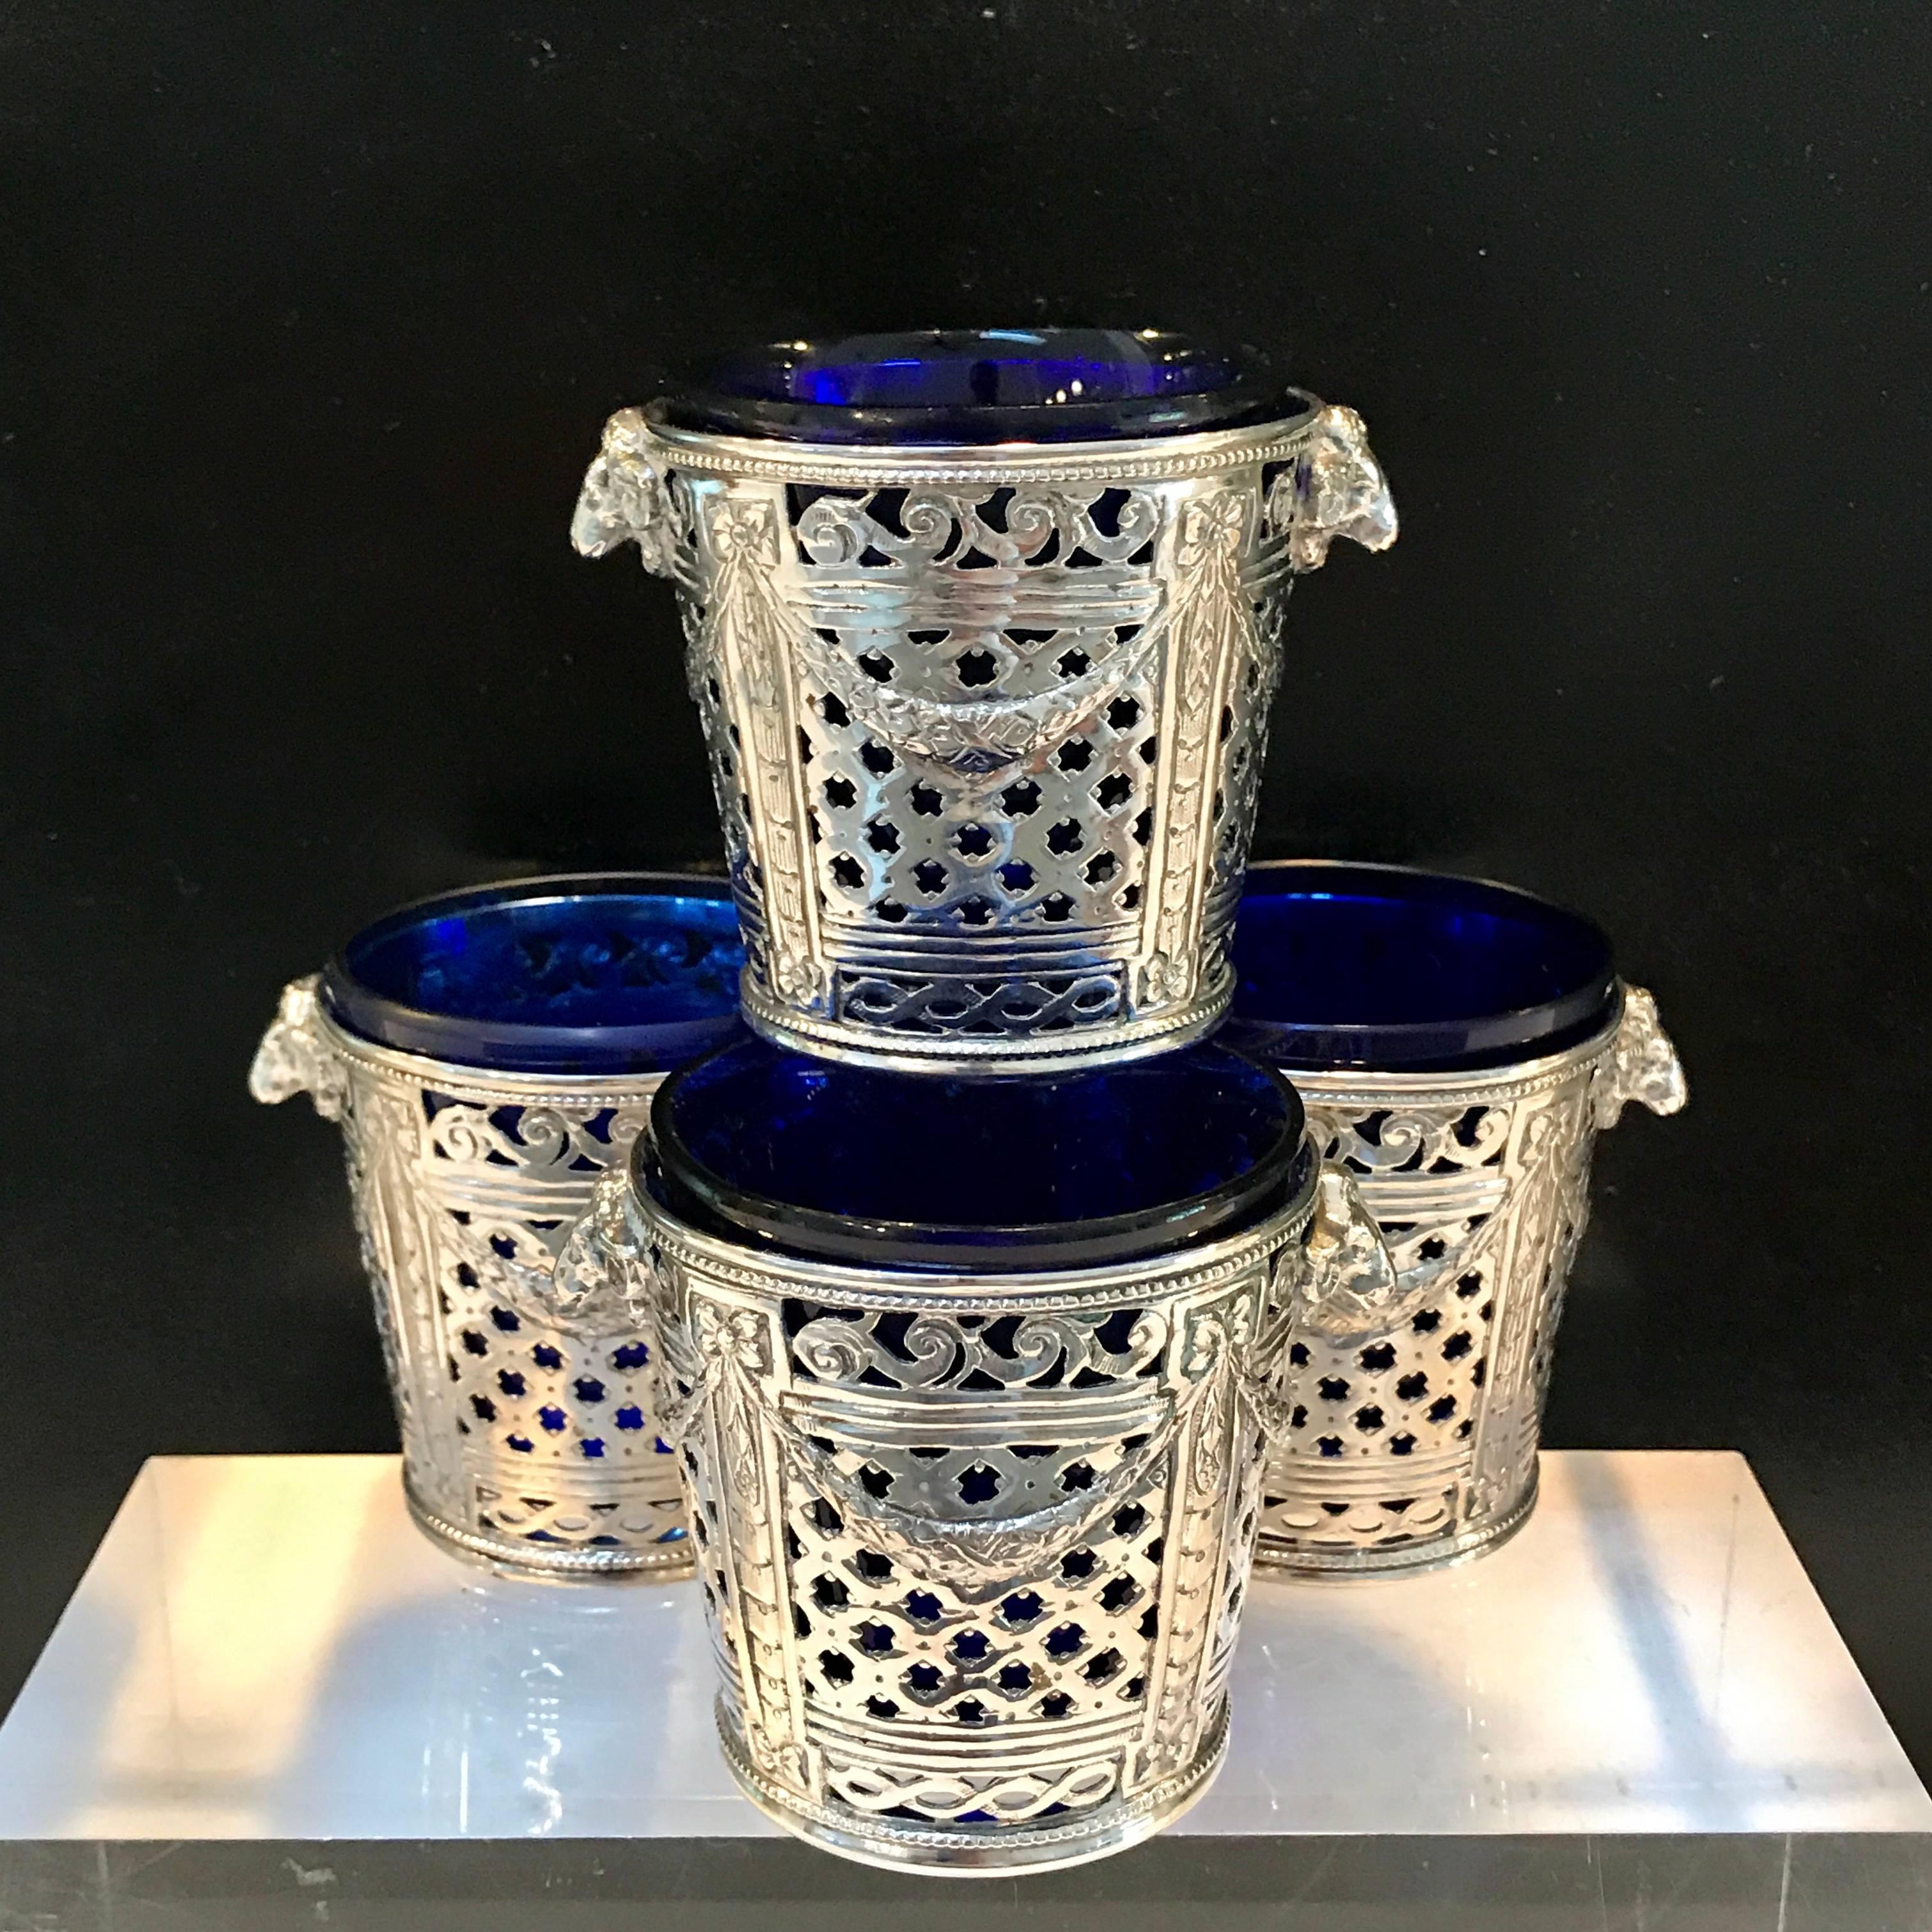 Four silver (.800) Louis XVI style cachepots or salts, with cobalt blue glass liners, each one finely cast and chased with rams head handles and pierced body, with removable cobalt blue glass liner
The liners measure 2.25